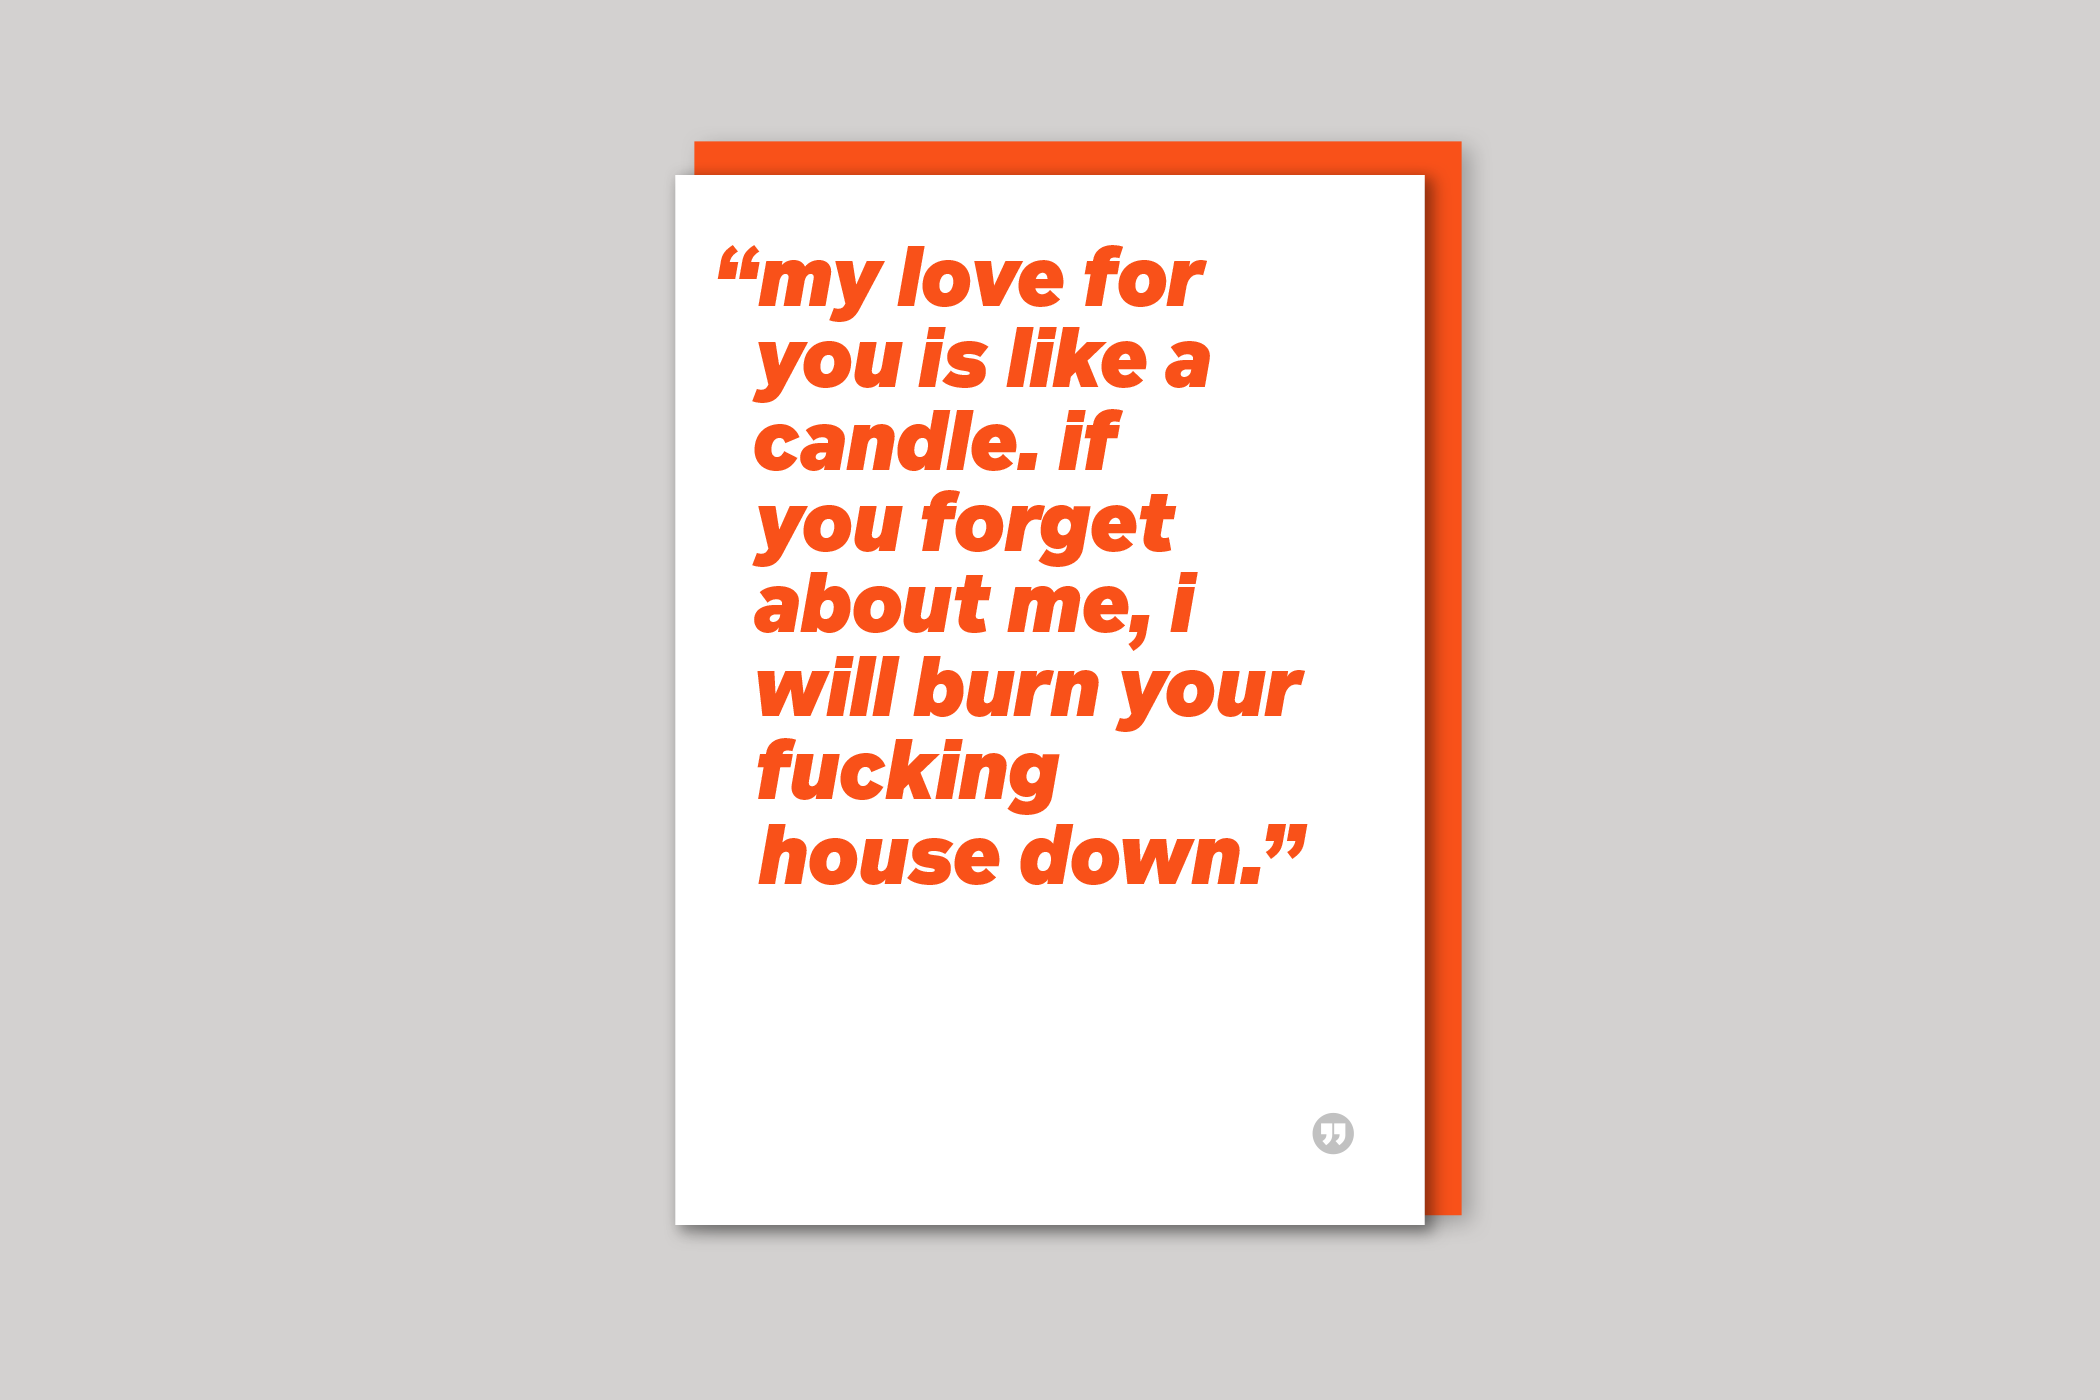 My Love For You funny quotation from Quotecards range of cards by Icon, back page.